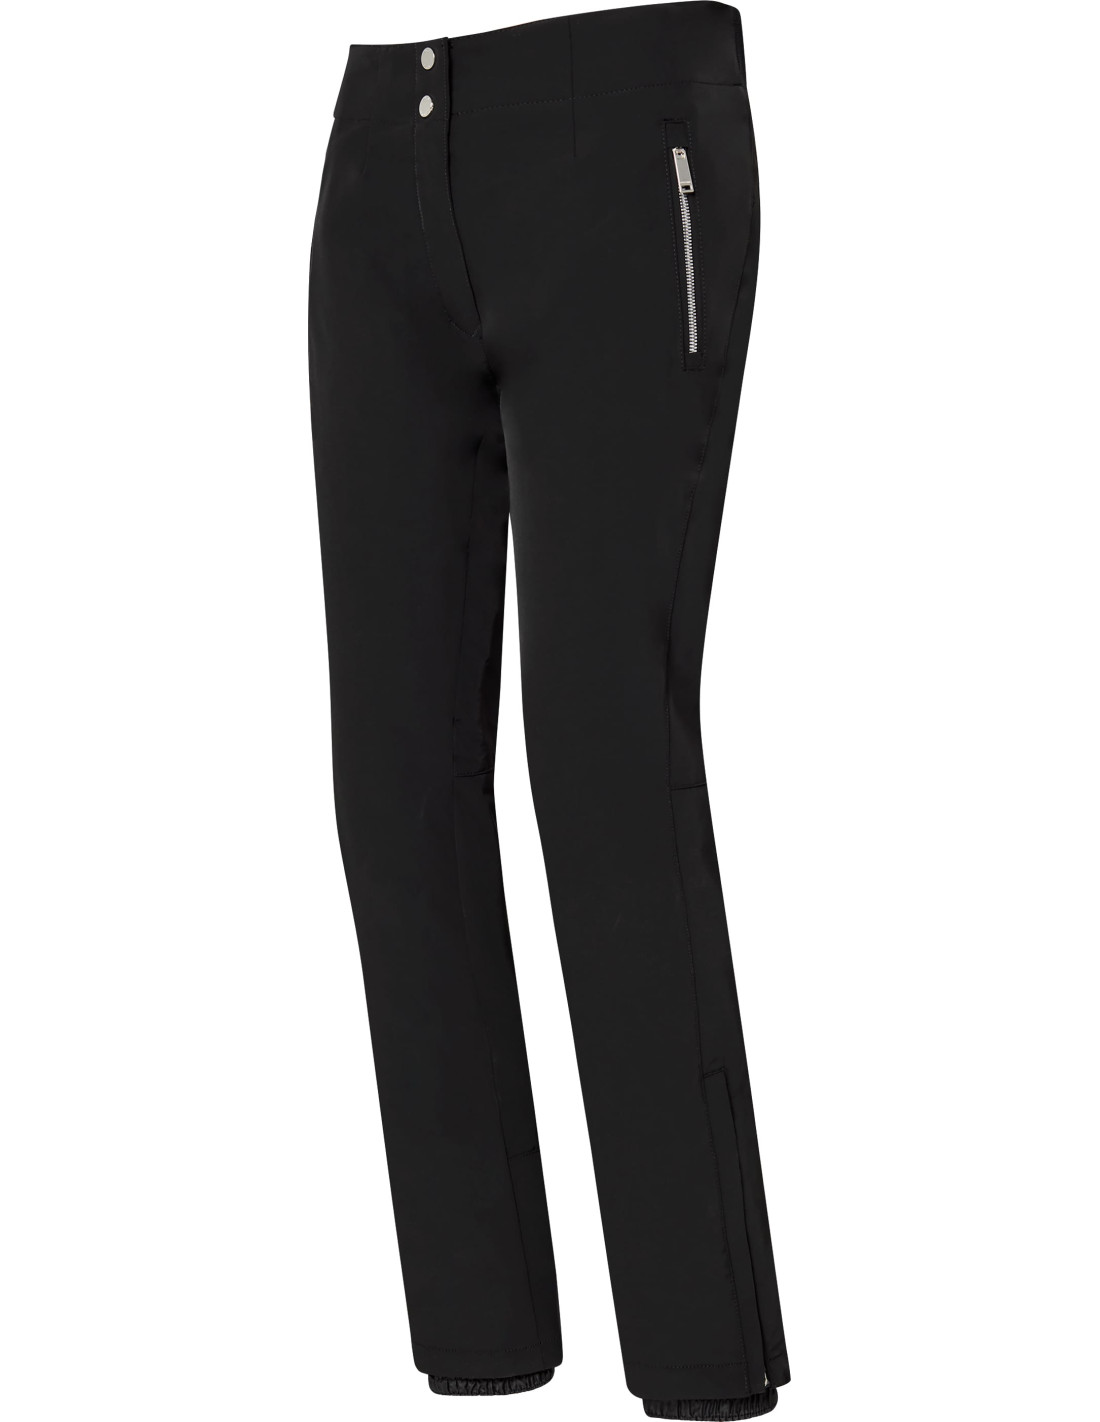 CIELO INSULATED PANT